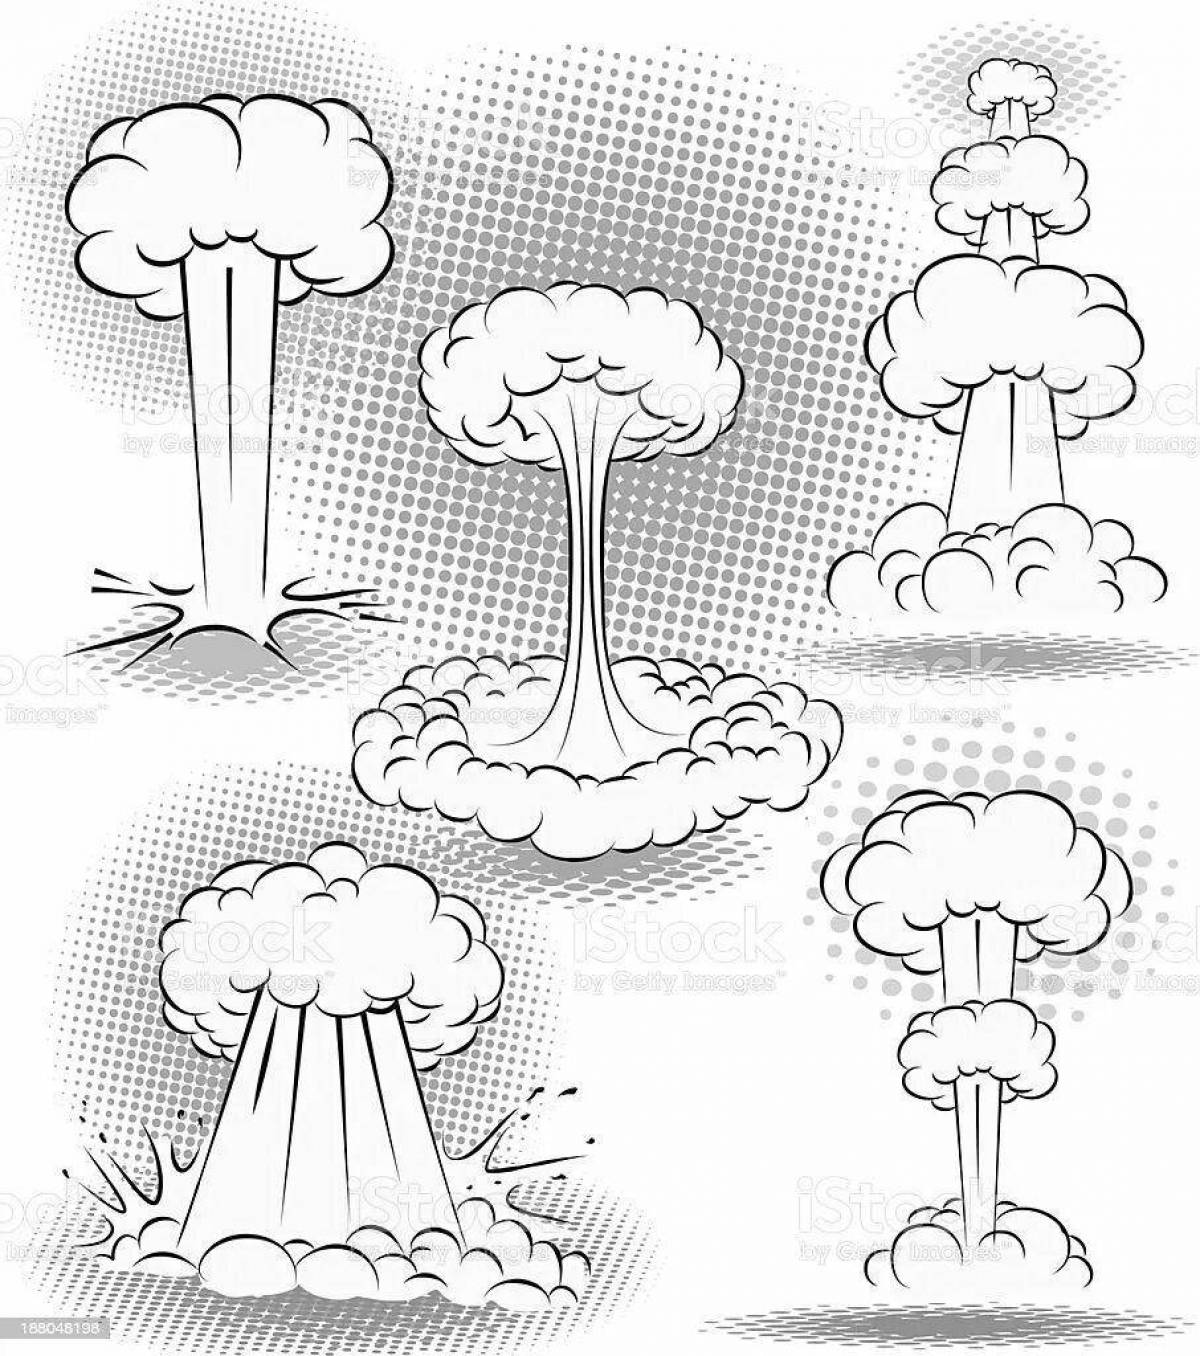 Amazing nuclear explosion coloring book